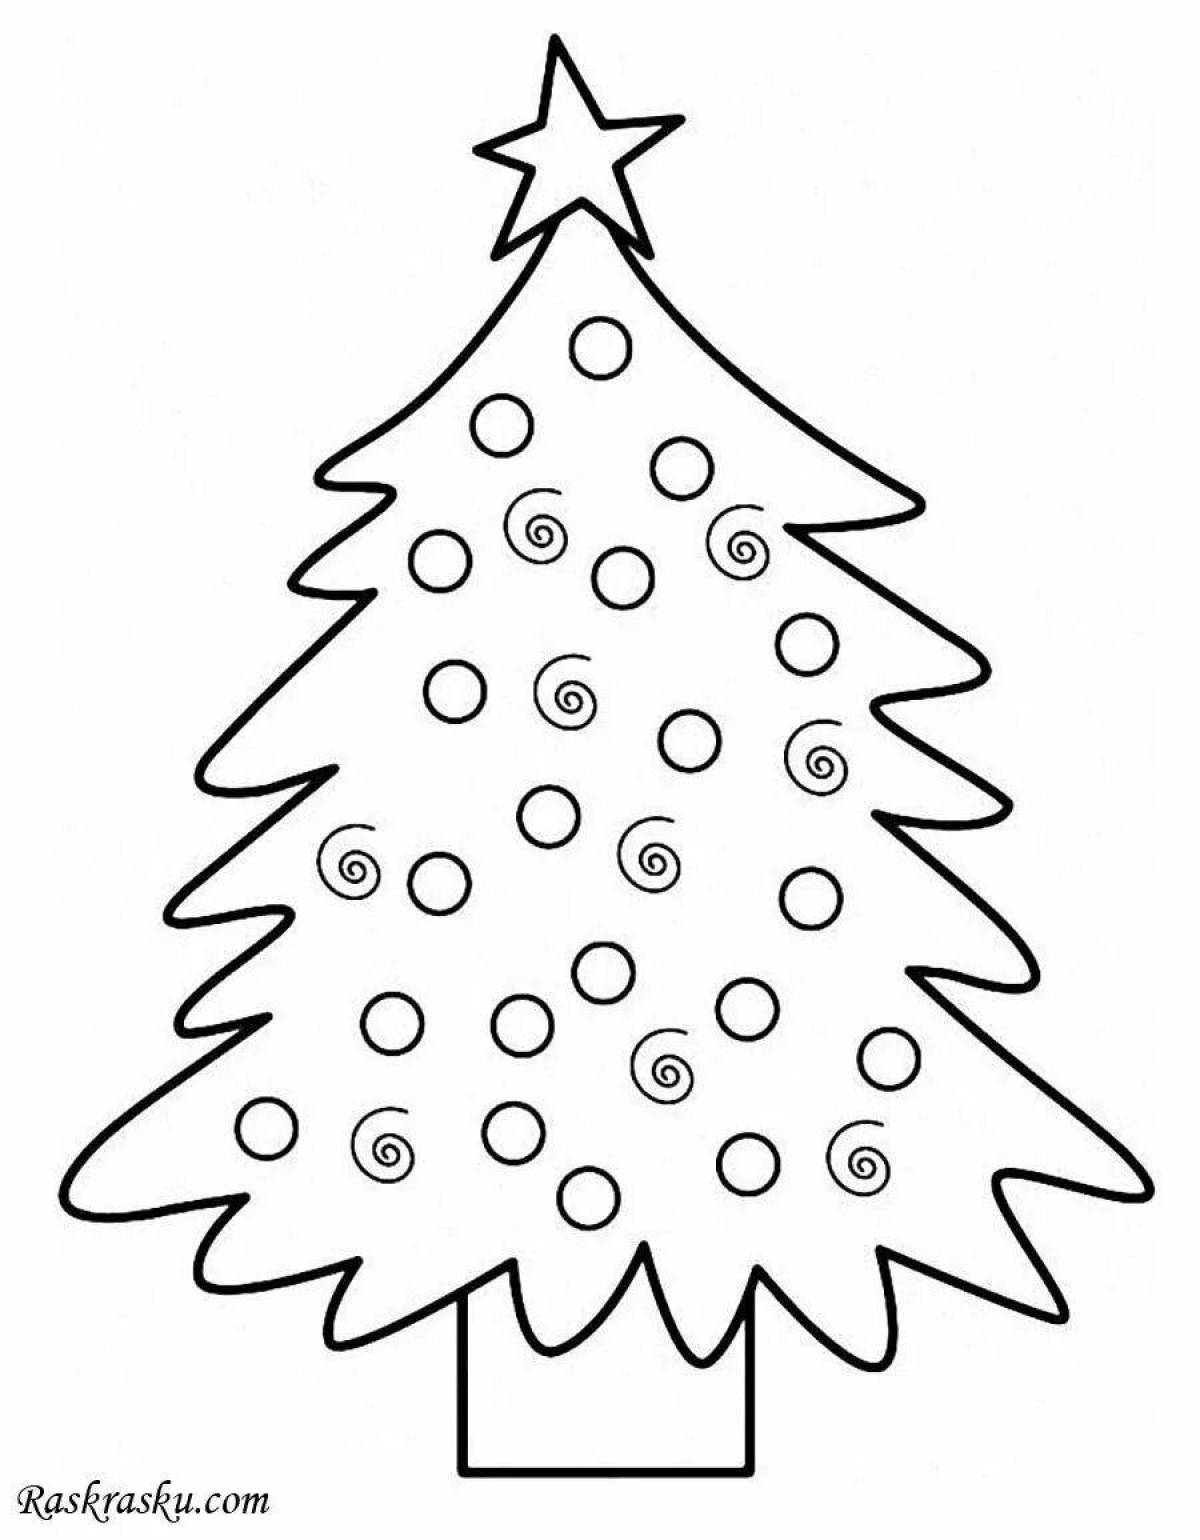 Gorgeous Christmas tree coloring book for 4-5 year olds